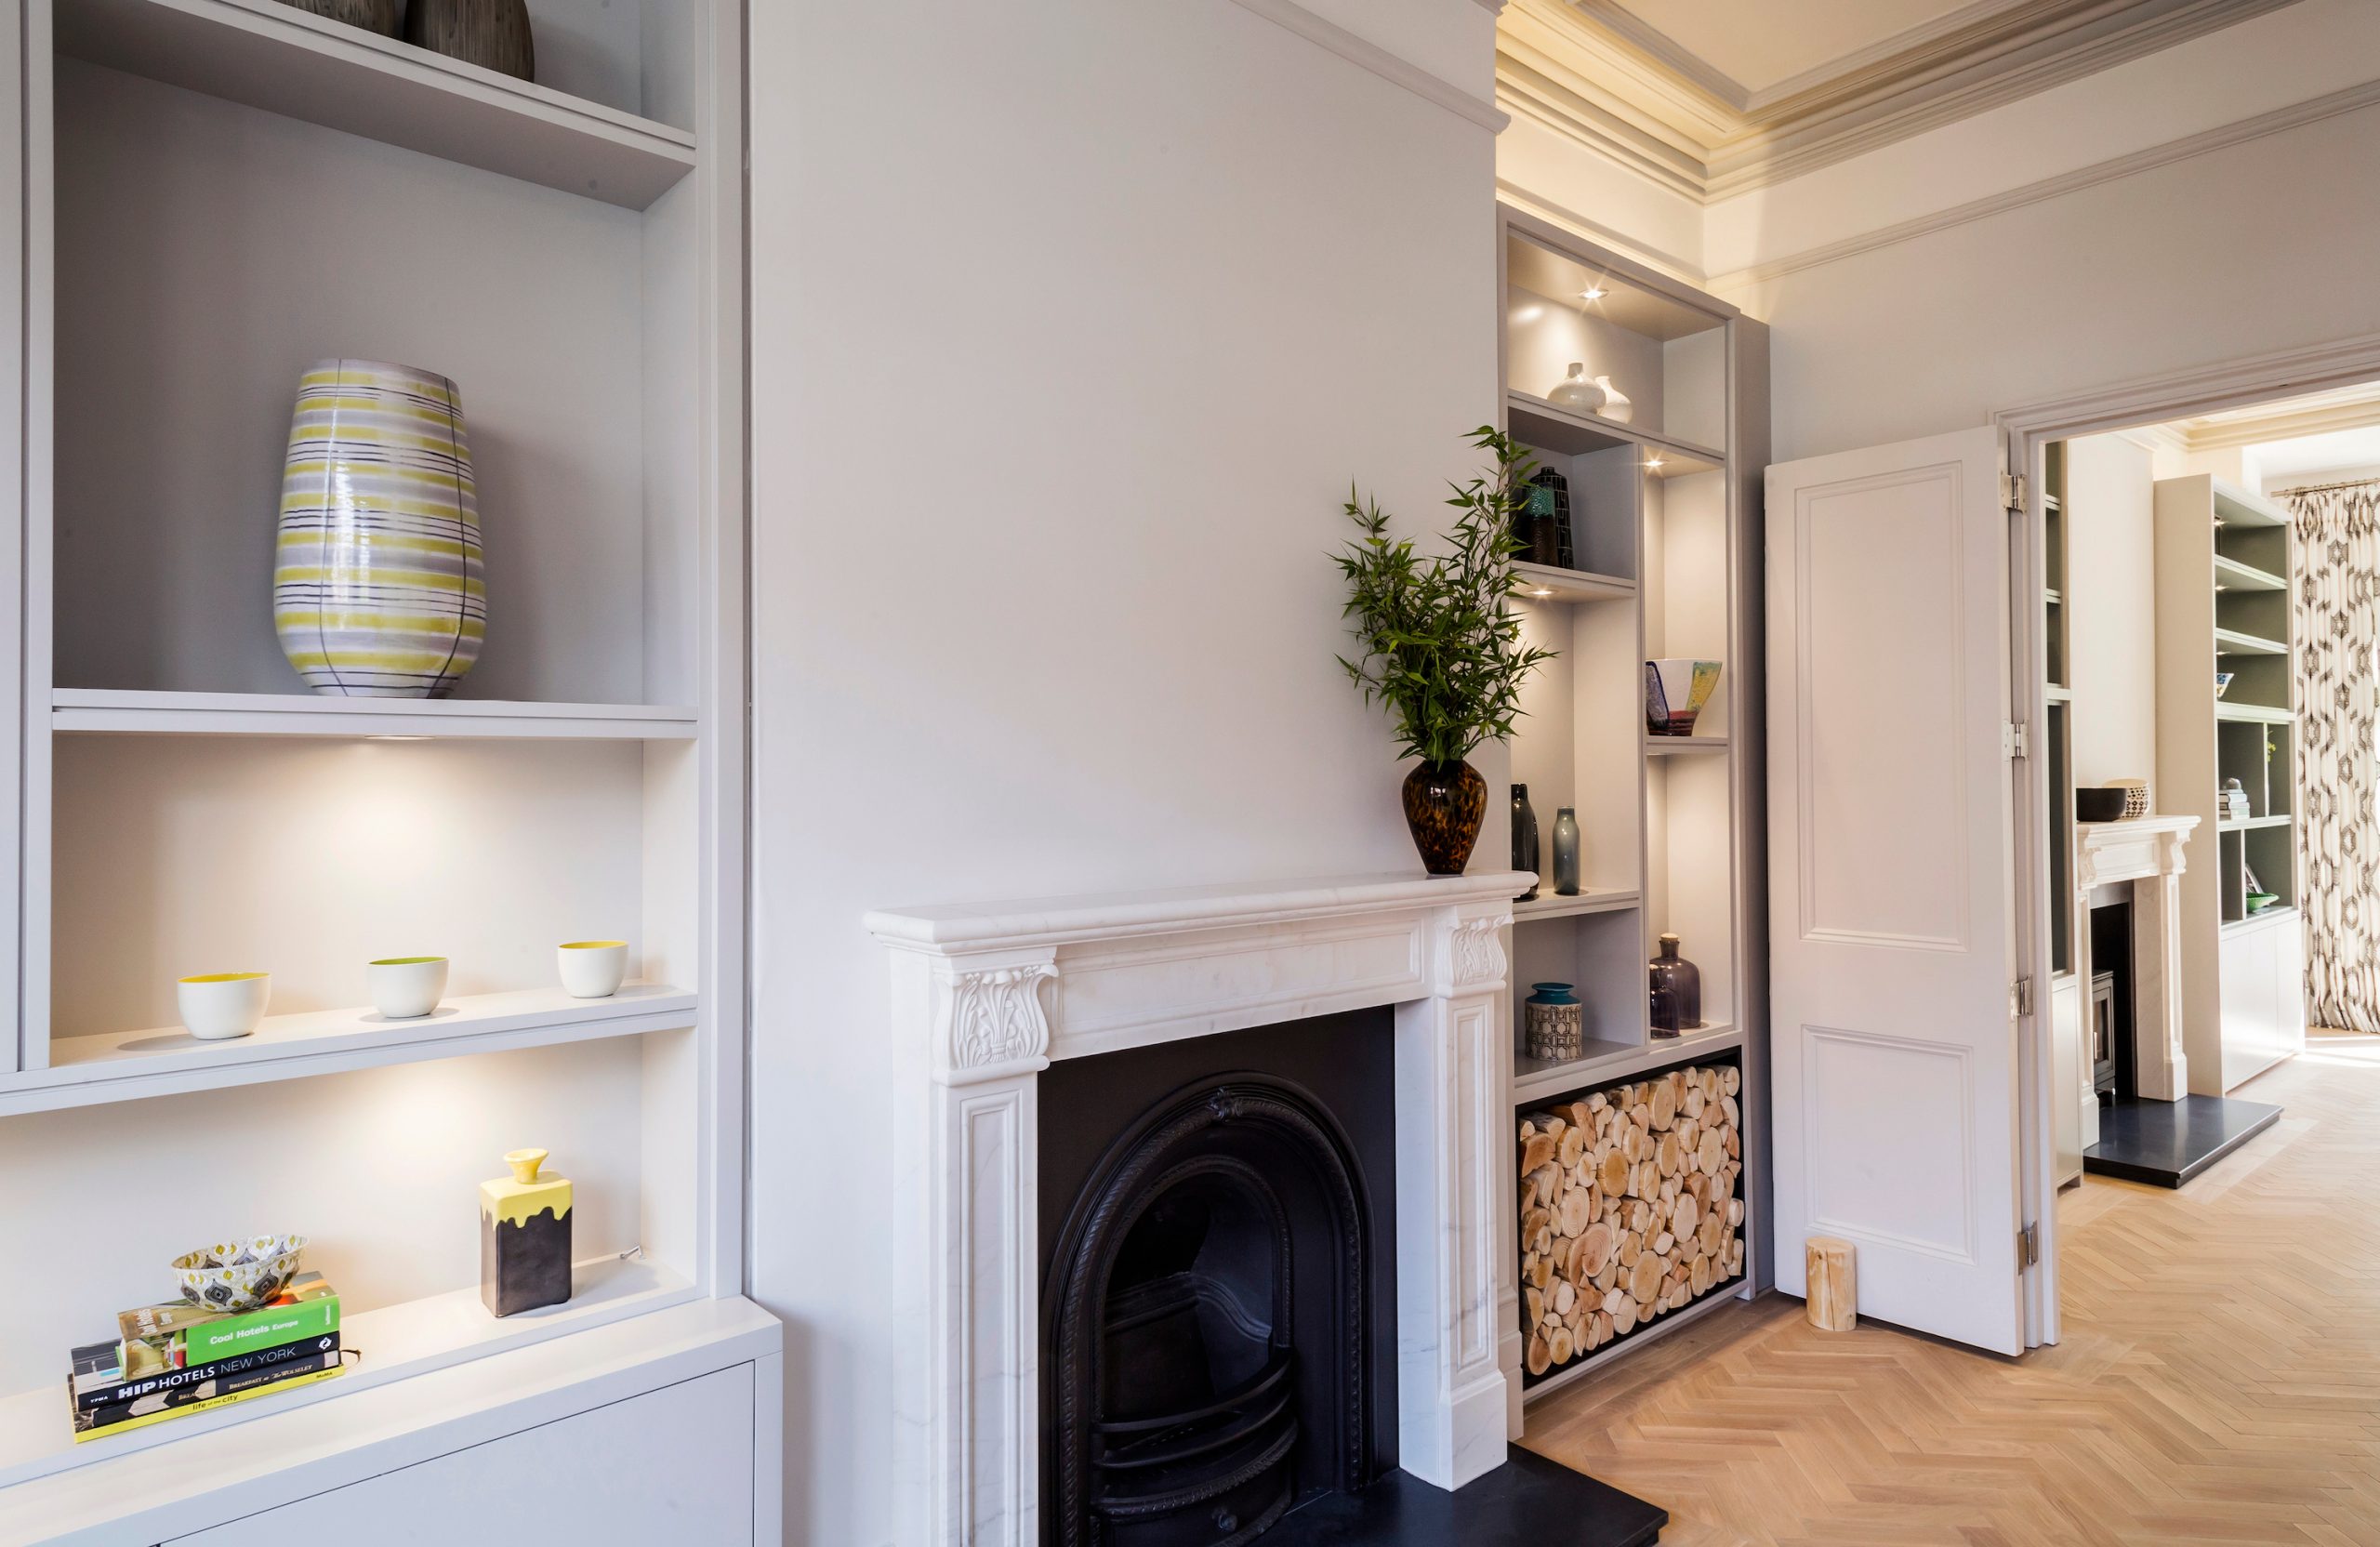 Edwardian Townhouse - living room overview with fireplaces and bespoke joinery